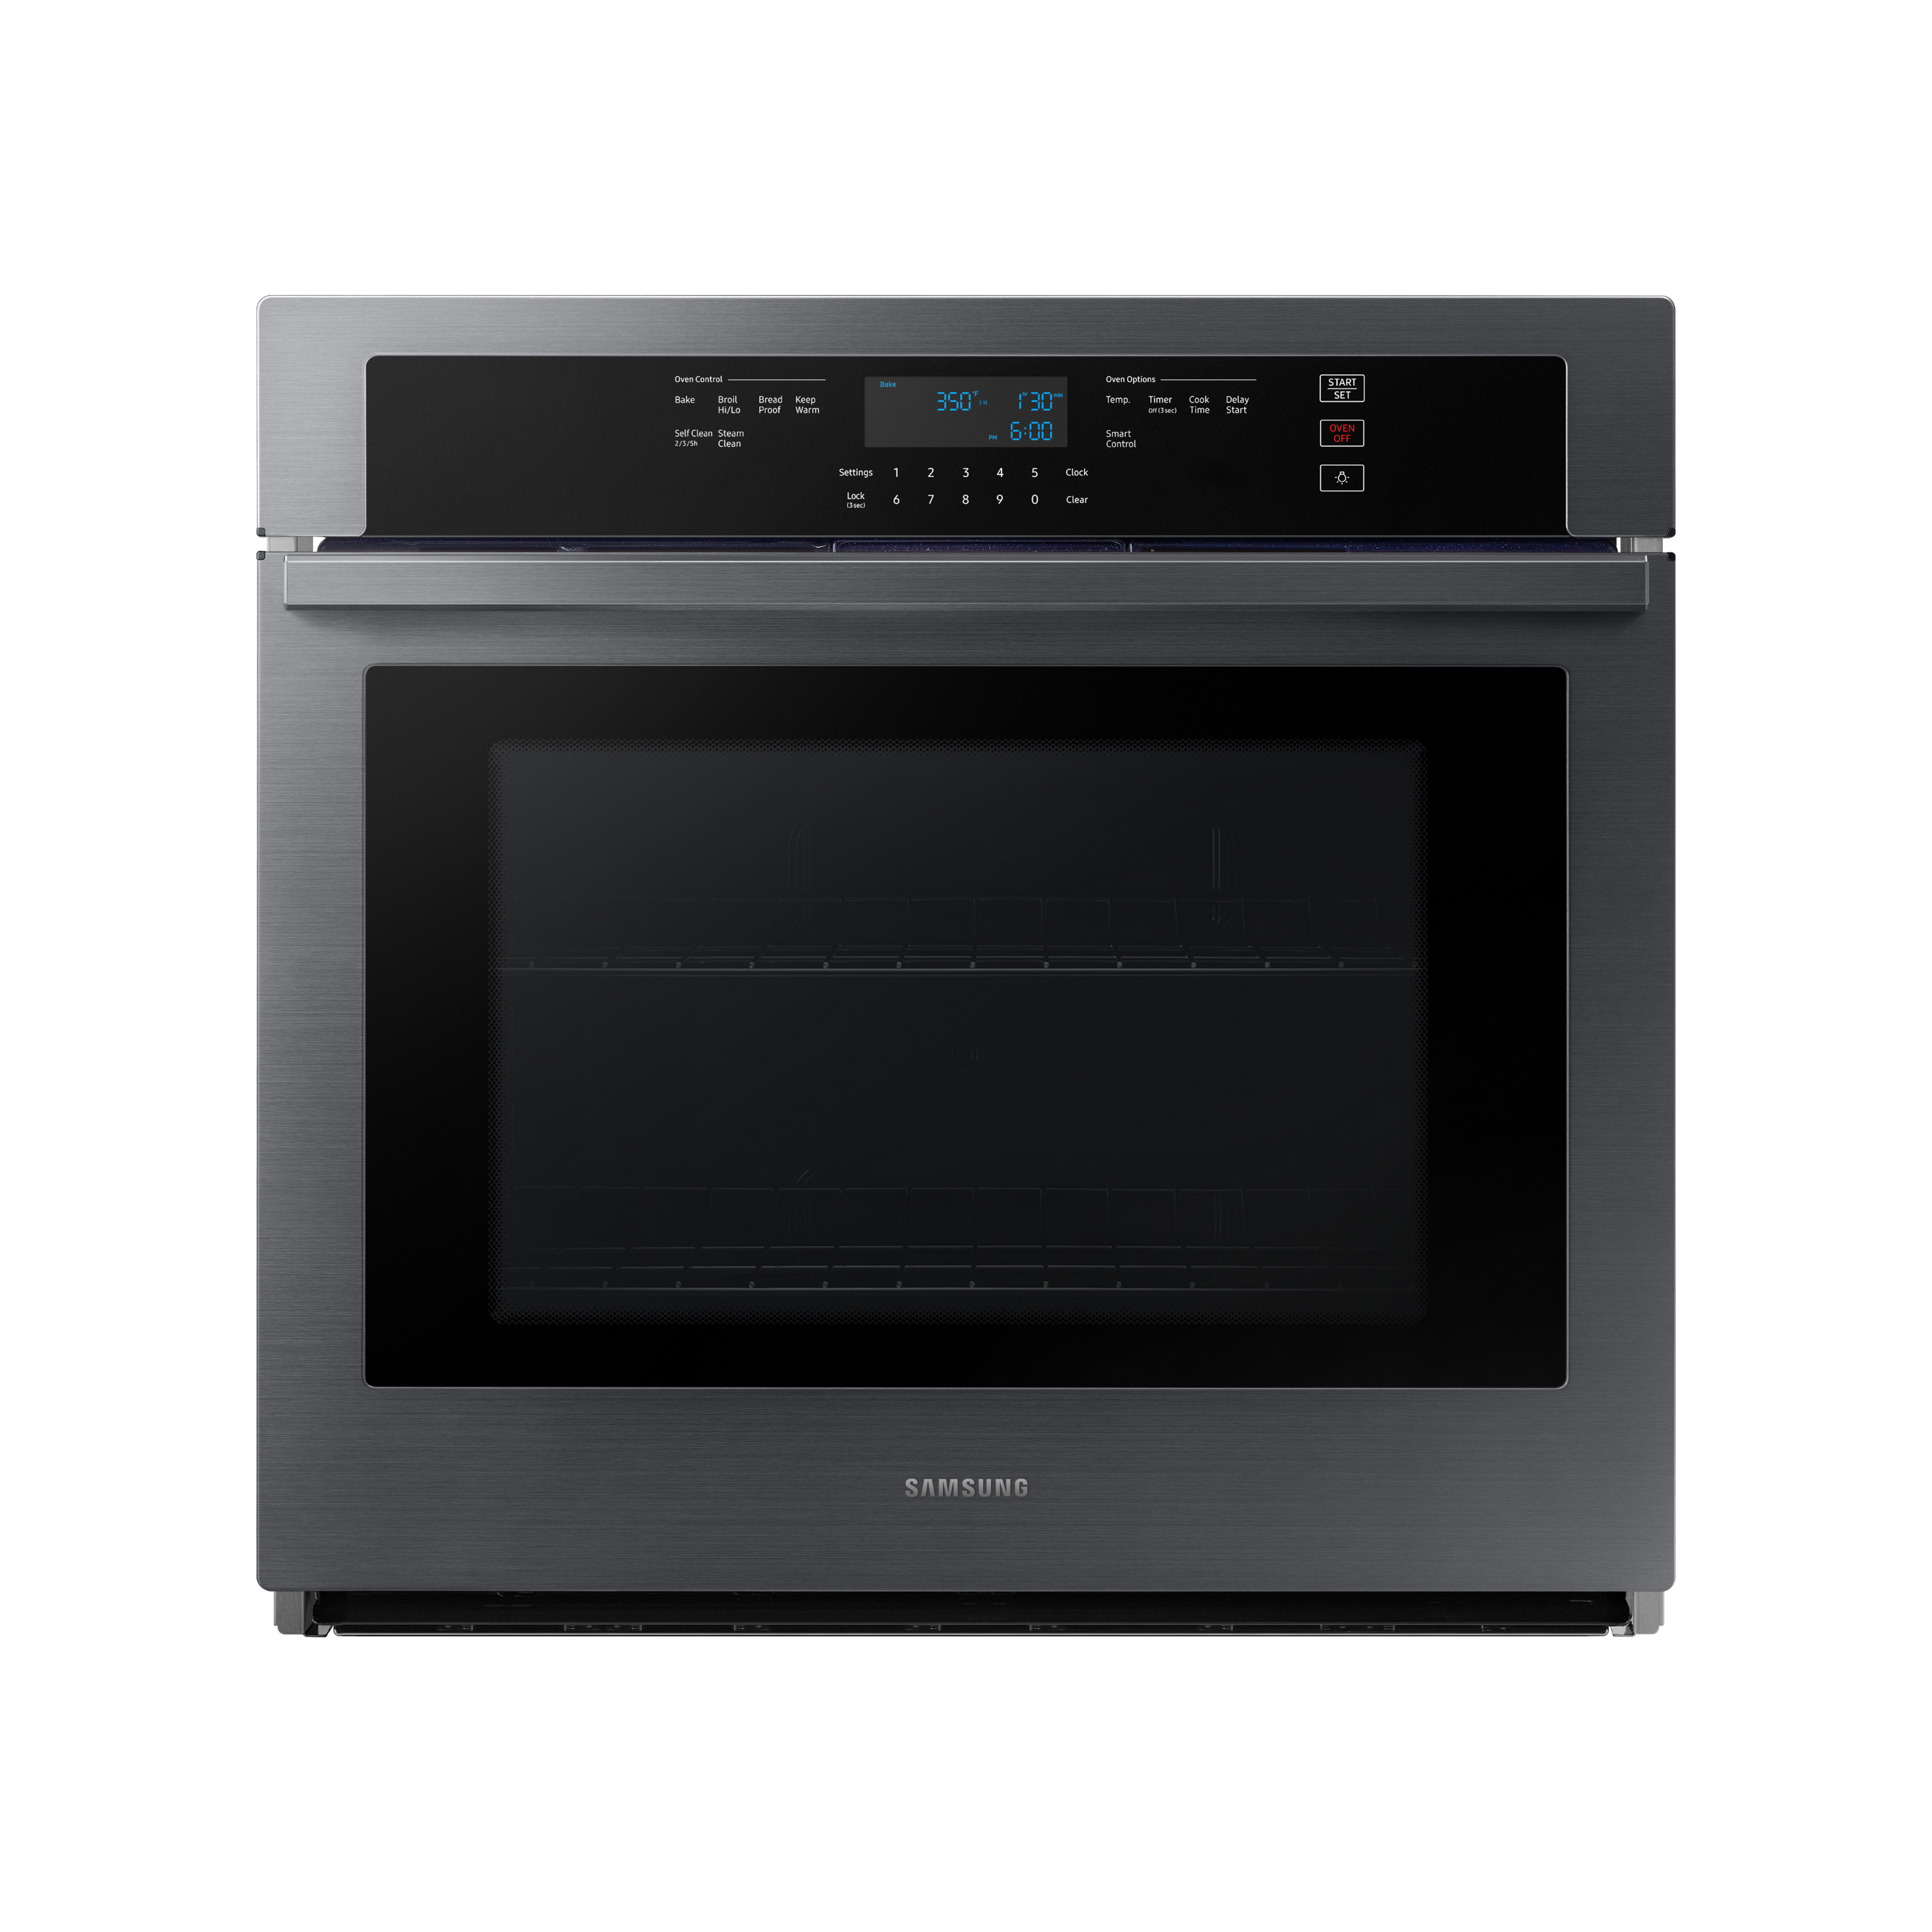 Samsung 30" Black Stainless Steel Electric Built In Single Oven